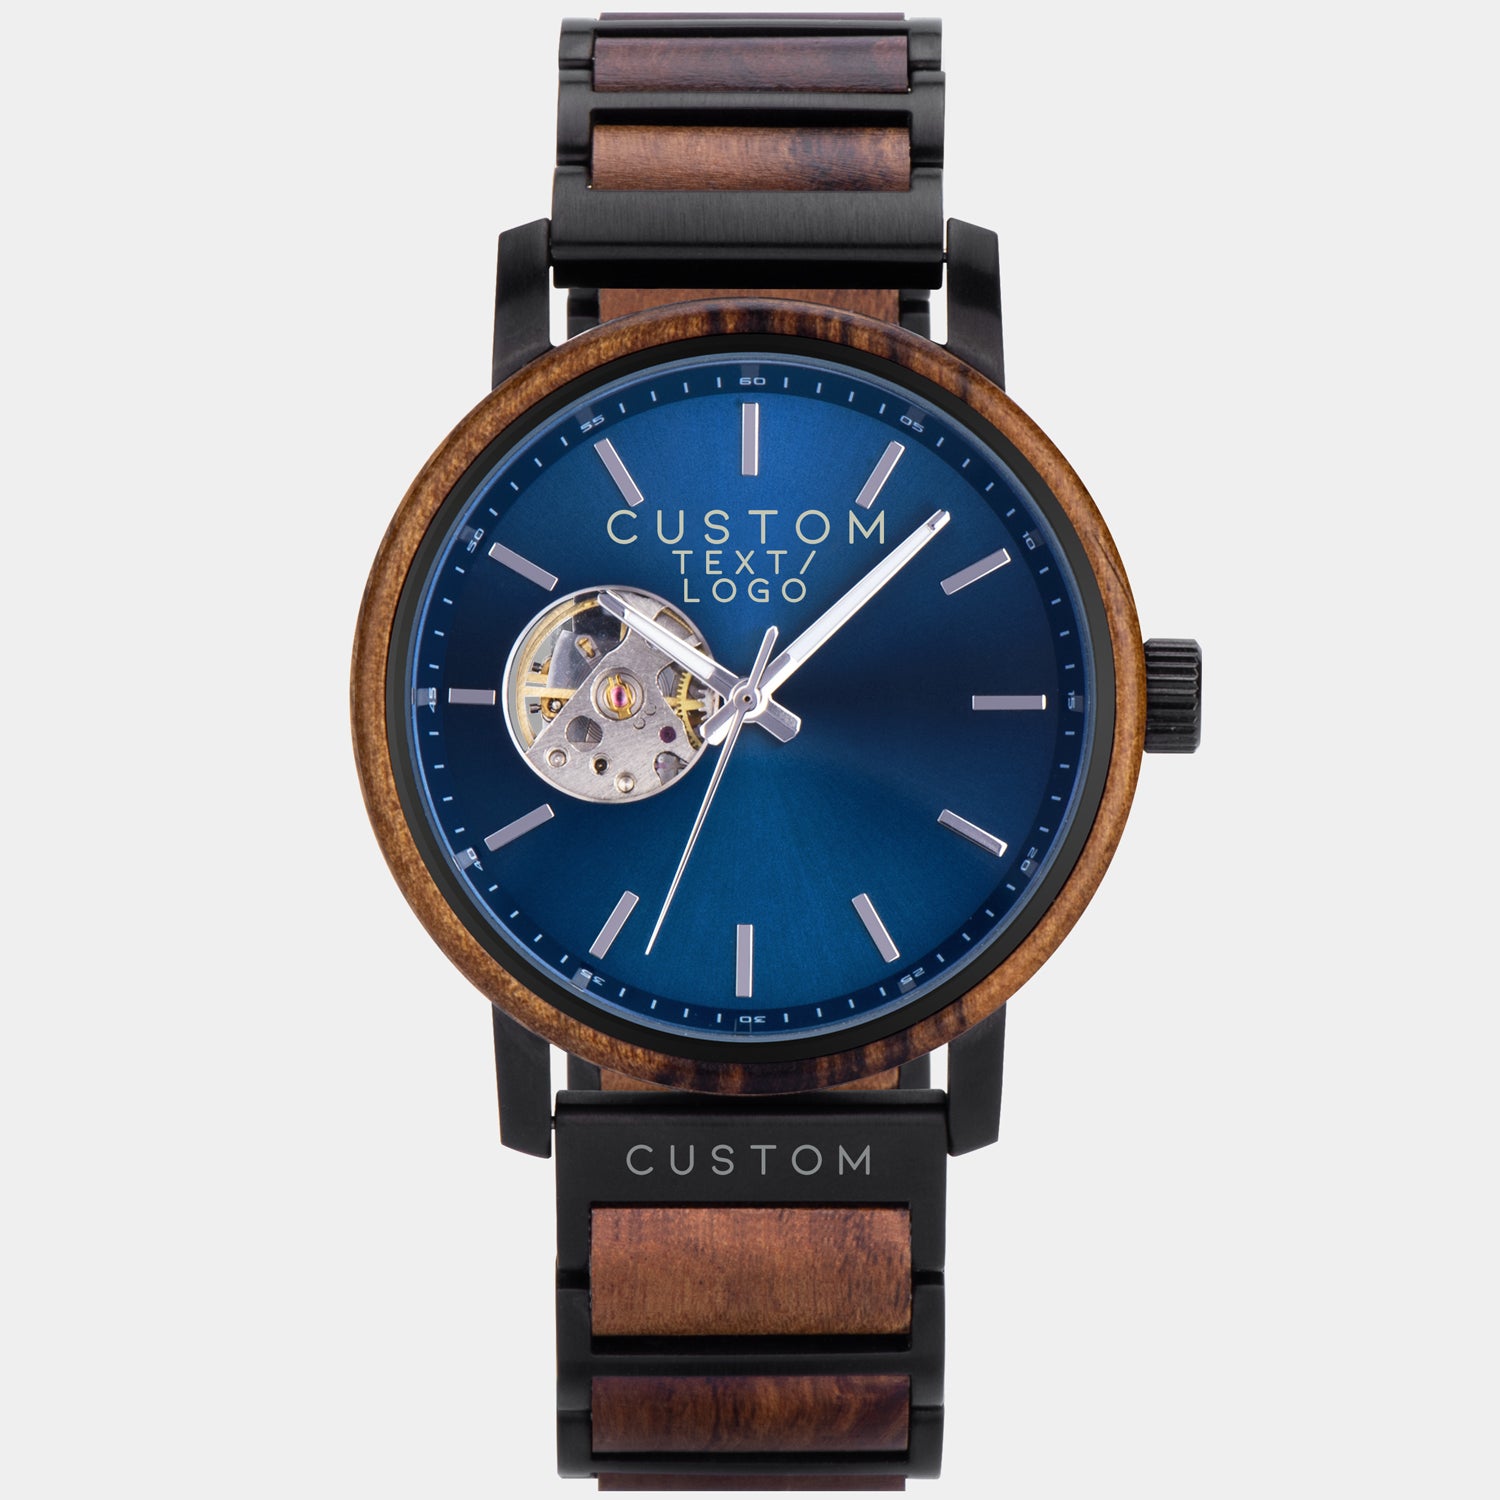 AlderWood Mens Blue Face Automatic Watch - Custom Wood Watch For Men - Best Watches of 2023 - Men's Blue Dial Watches - Mens Blue Face Watch Black Strap - Ecofriendly Custom Anniversary Gift - Sustainable Groomsmen Gifts - Custom Automatic Wood Watch For Men. Custom Logo On Watch Face - Custom Automatic Mechanical Watch - Engraved Mechanical Wooden Watches For Men. Skeleton Back Watch Engraved In Nature Watches - Custom Personalized Watch For Men Birthday. Holiday 2023 Gifts For Men, Luxury Wood Watches Best Custom Watch For Husband, Boyfriend, Groom, Groomsmen, and More